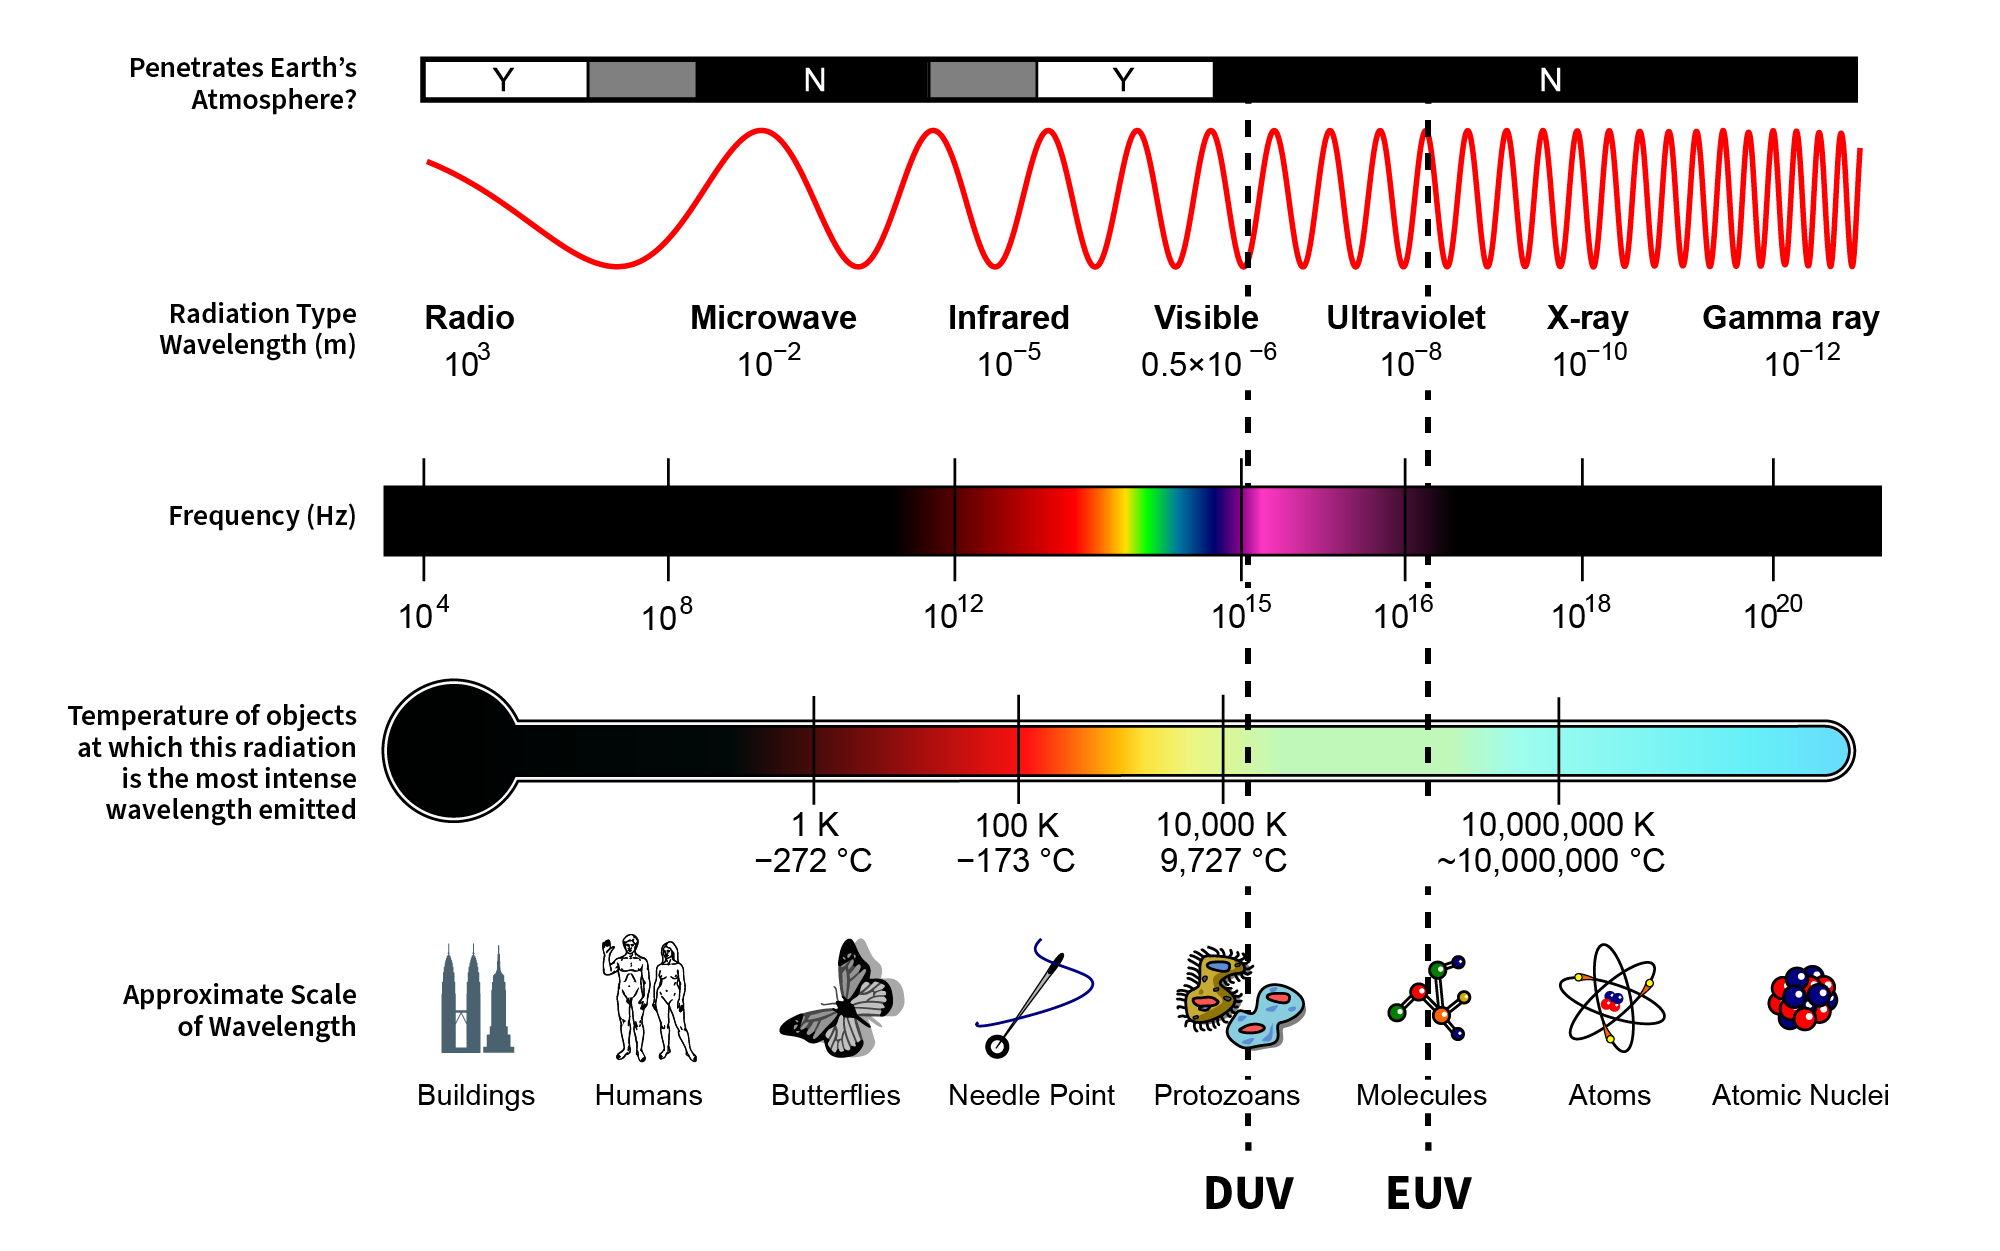 electromagnetic spectrum with the approximate location of the DUV and EUV wavelengths highlighted. DUV wavelengths are about the size of bacteria, whereas EUV wavelengths are closer to the size of molecules. 